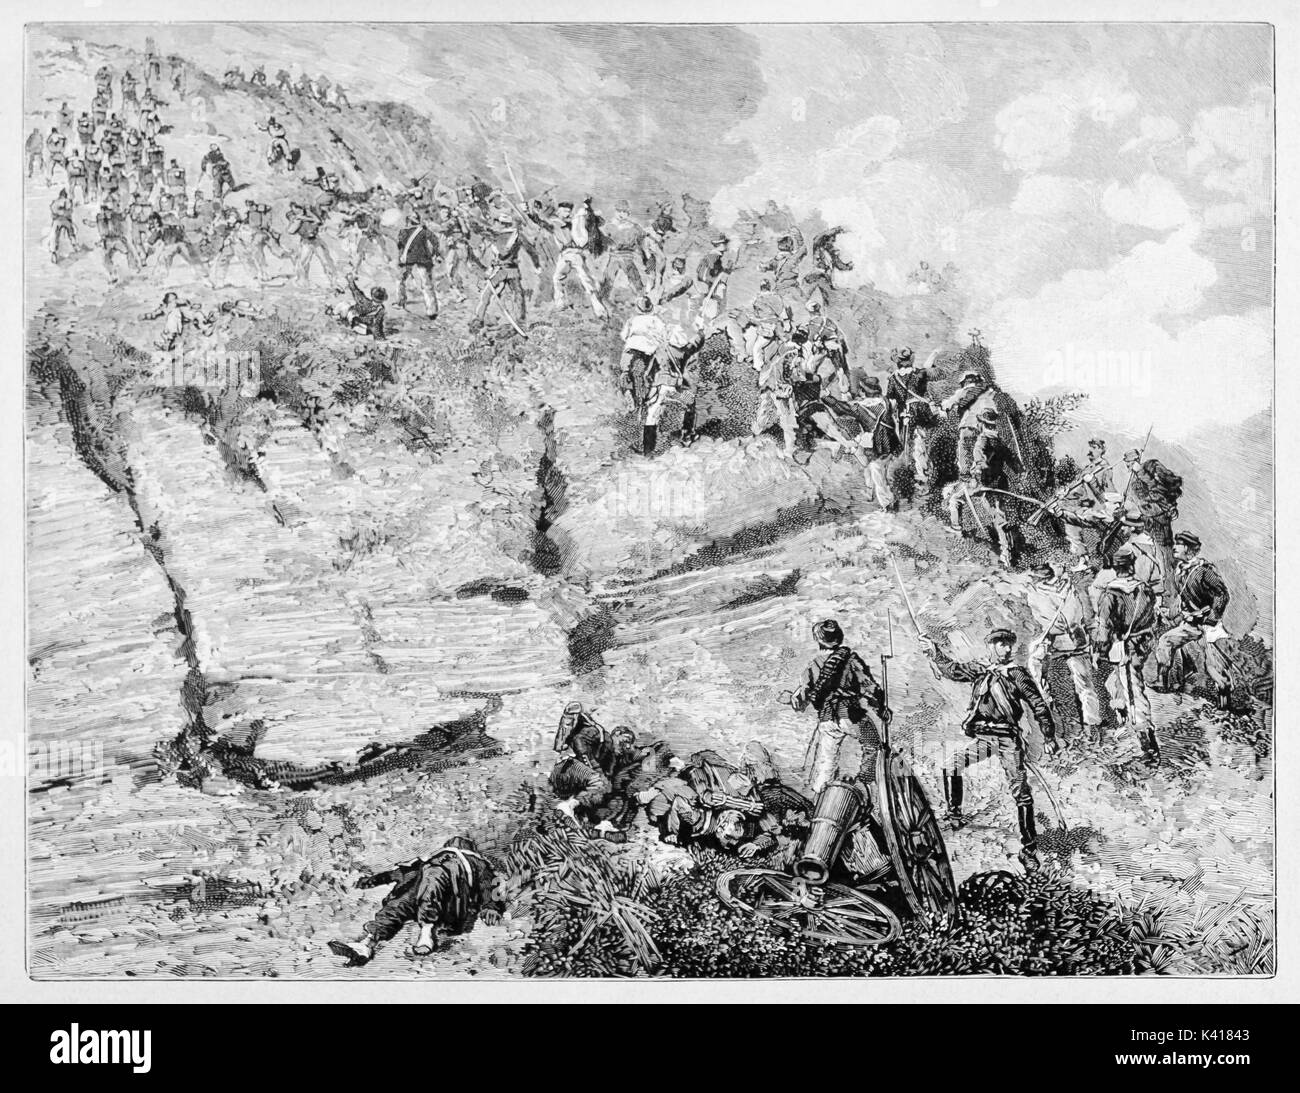 Ancient battle with bayonets, swords and cannons in a rocky and smoky battlefield near Calatafimi. The Thousand of Garibaldi against the Bourbon army. By E. Matania,1884 Stock Photo